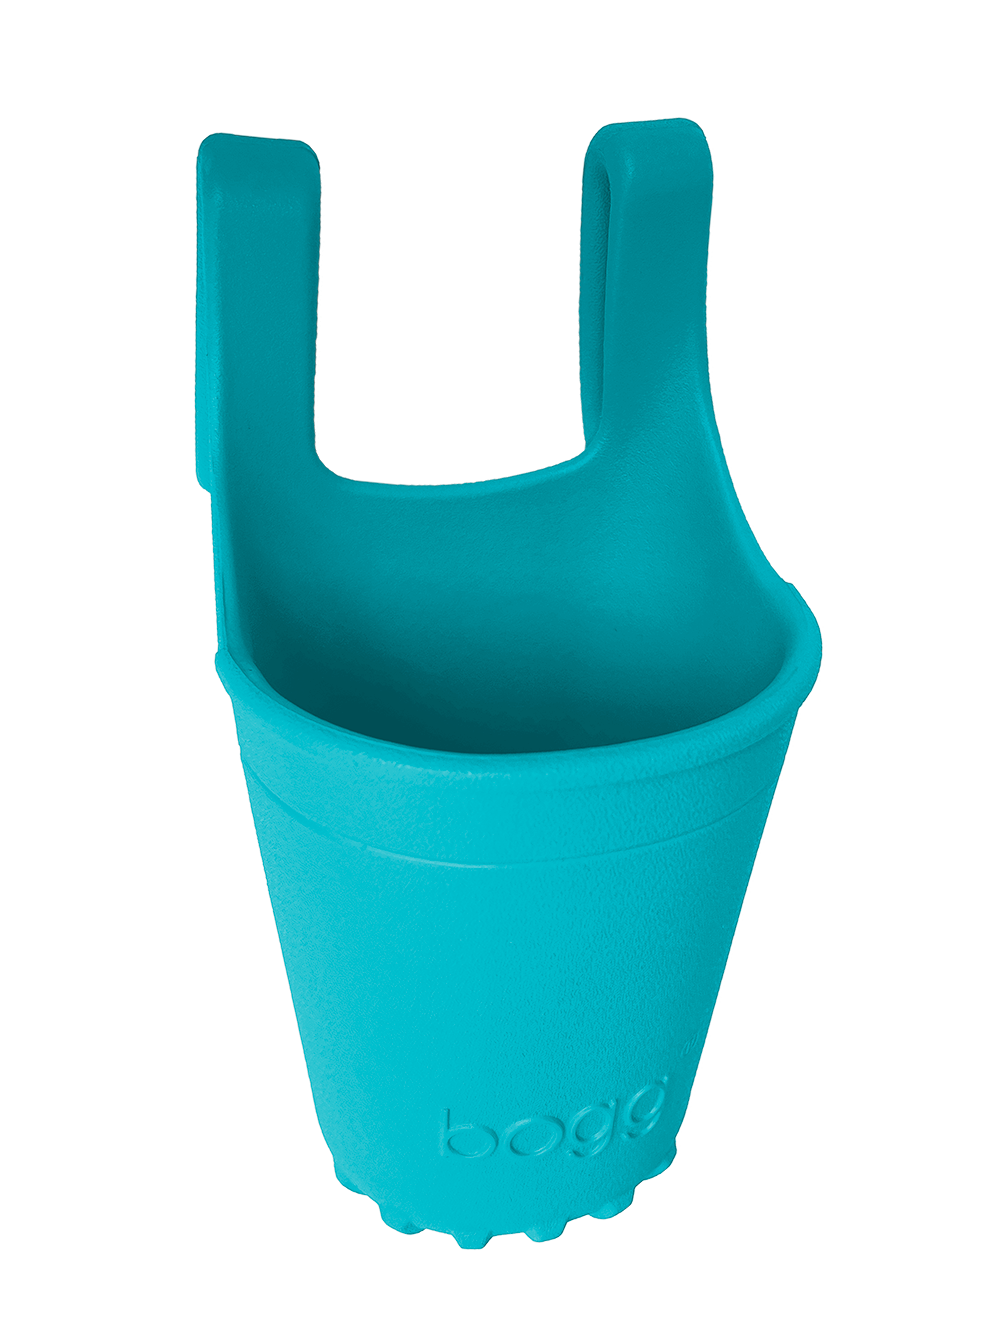 TURQUOISE and Caicos Bogg® Bevy Drink Holder - Bogg® Bag